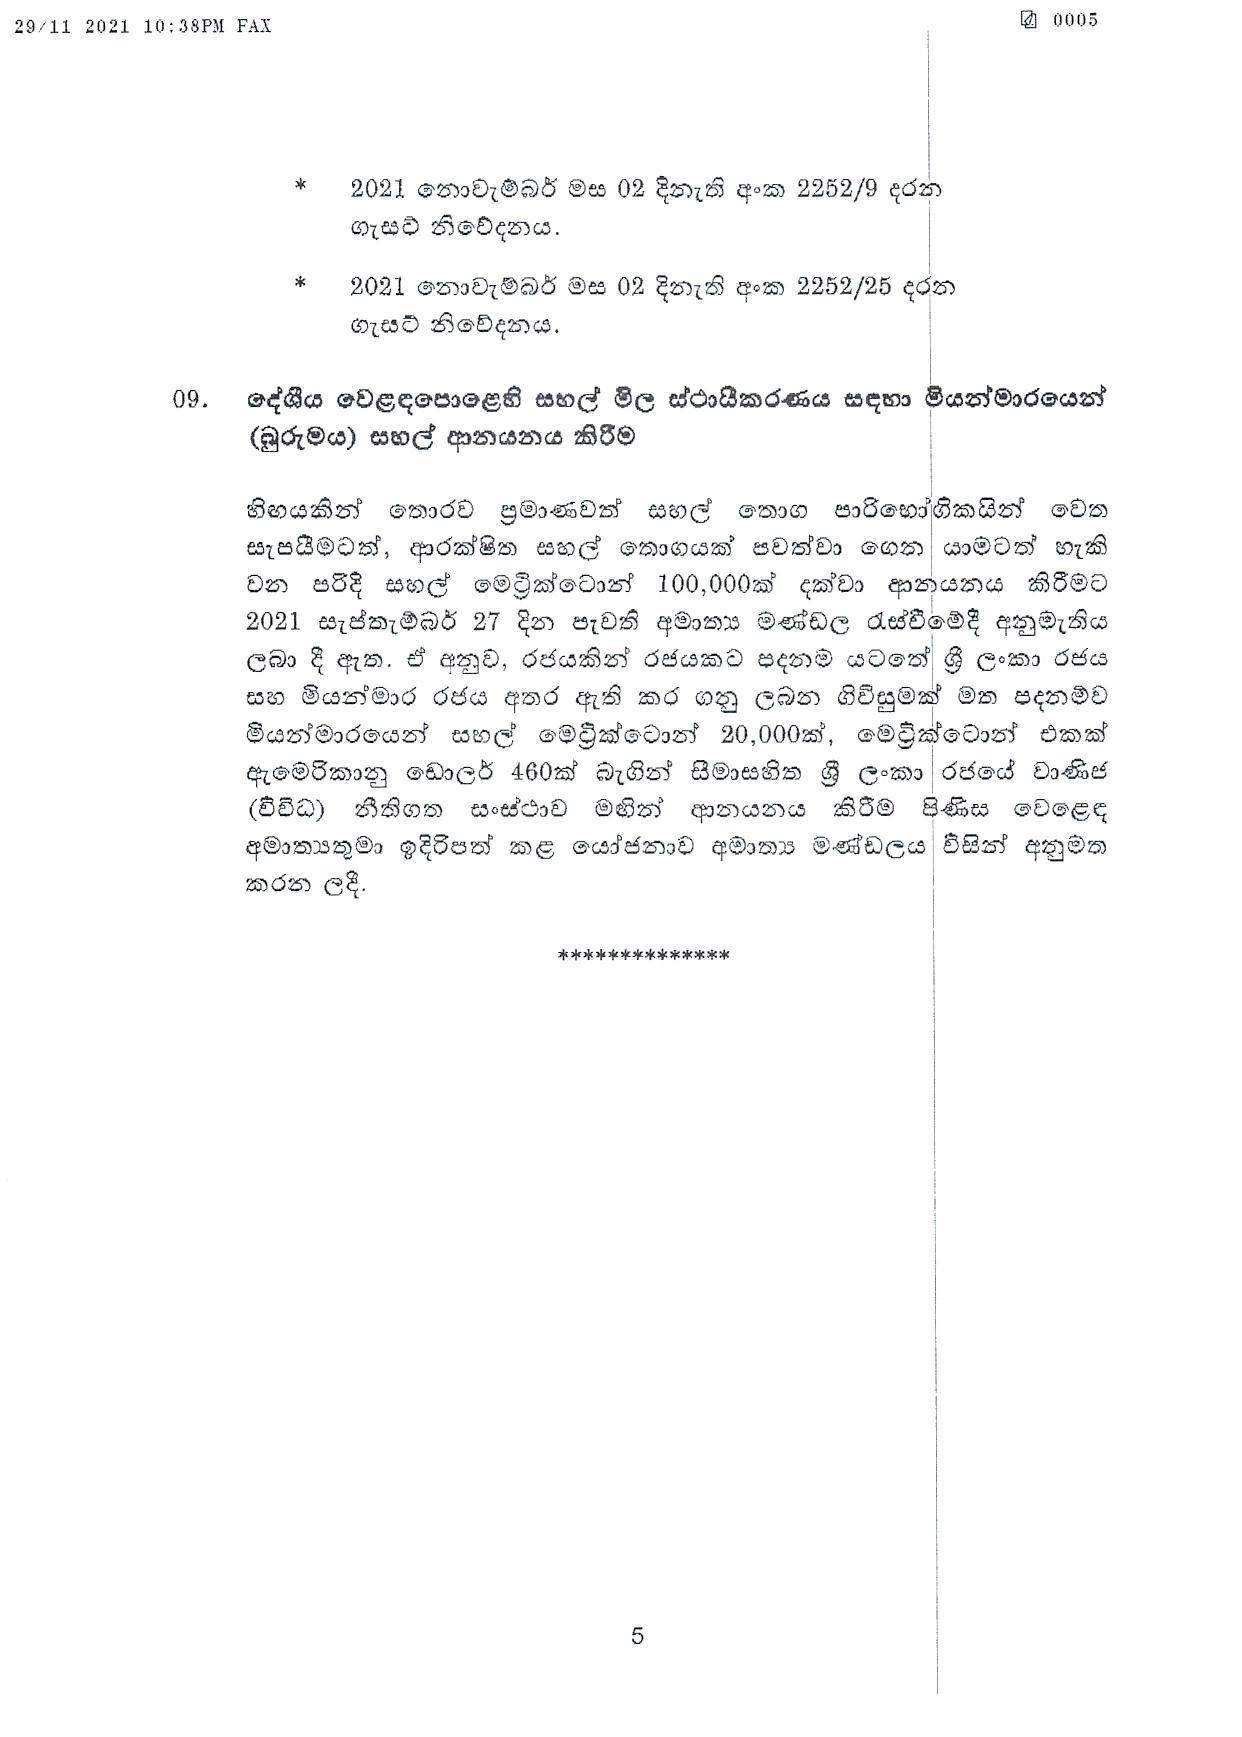 Cabinet Decisions on 29.11.2021 page 005